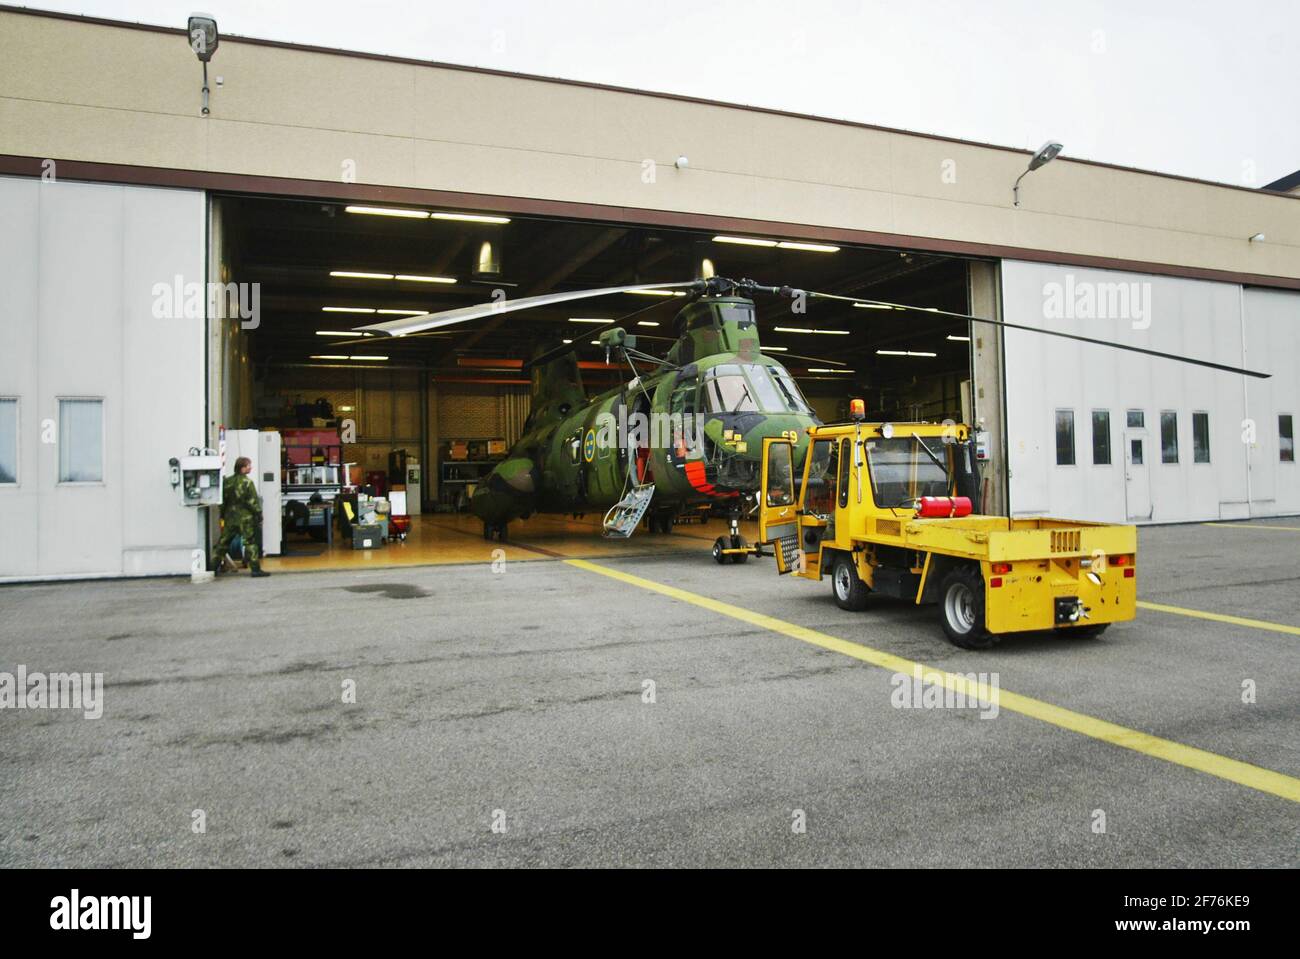 The Swedish Air Force's Helicopter 4, Hkp 4, Boeing Vertol 107, is rolled out of the hangar at Berga naval base. Hkp 4 was used in submarine hunts and rescue missions such as the Estonia disaster. Stock Photo